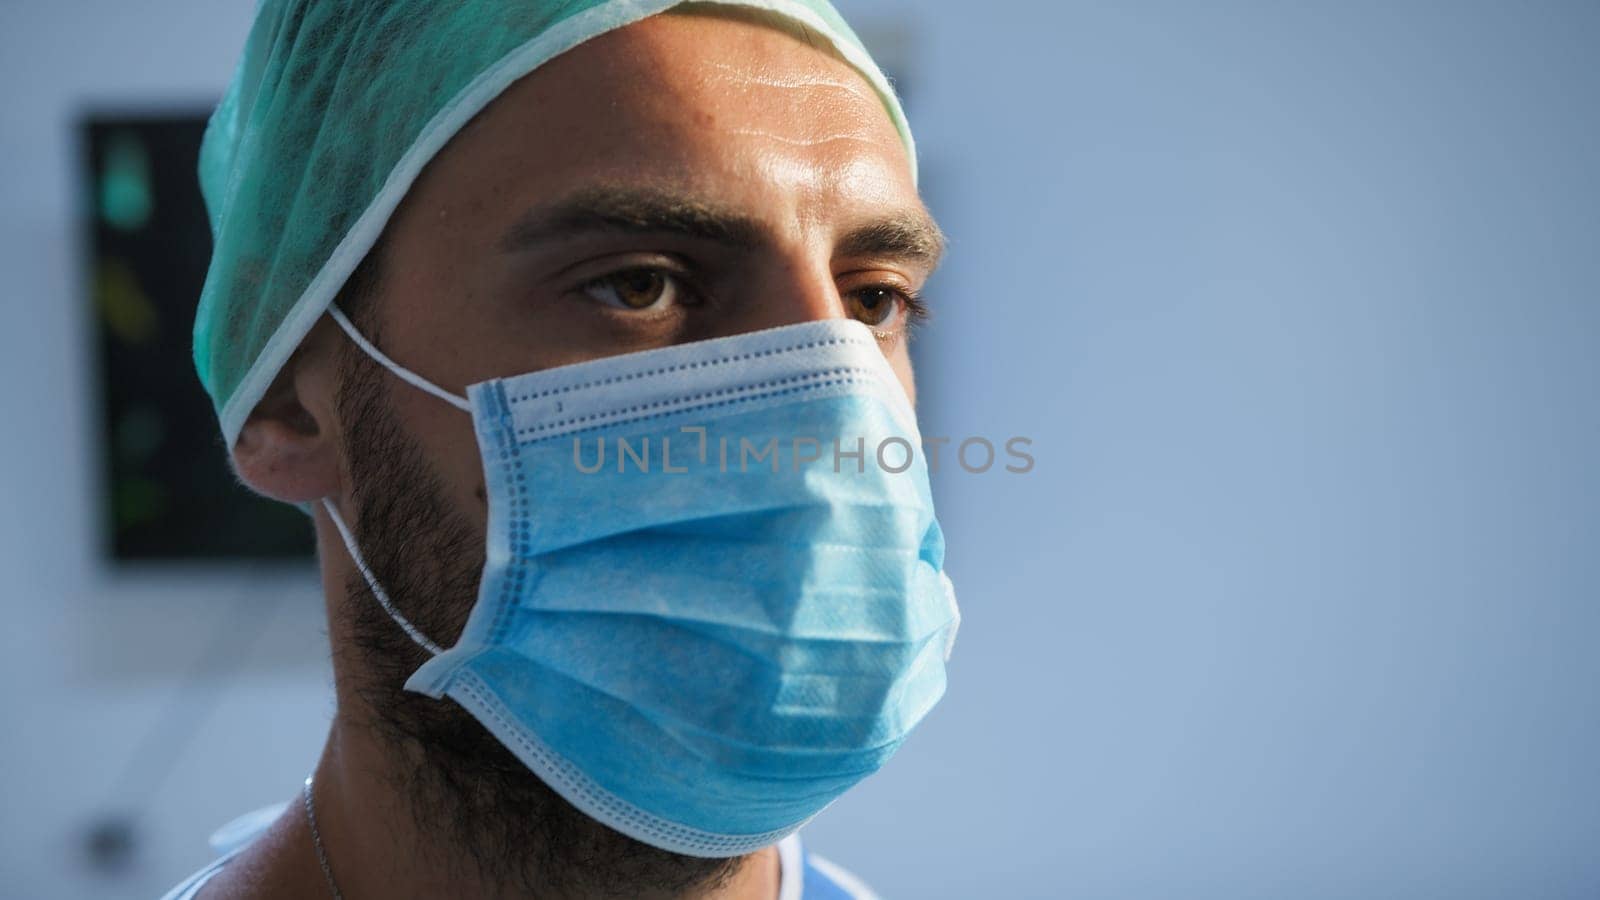 Italian Dentist wears mask before surgery by Polonio_Video